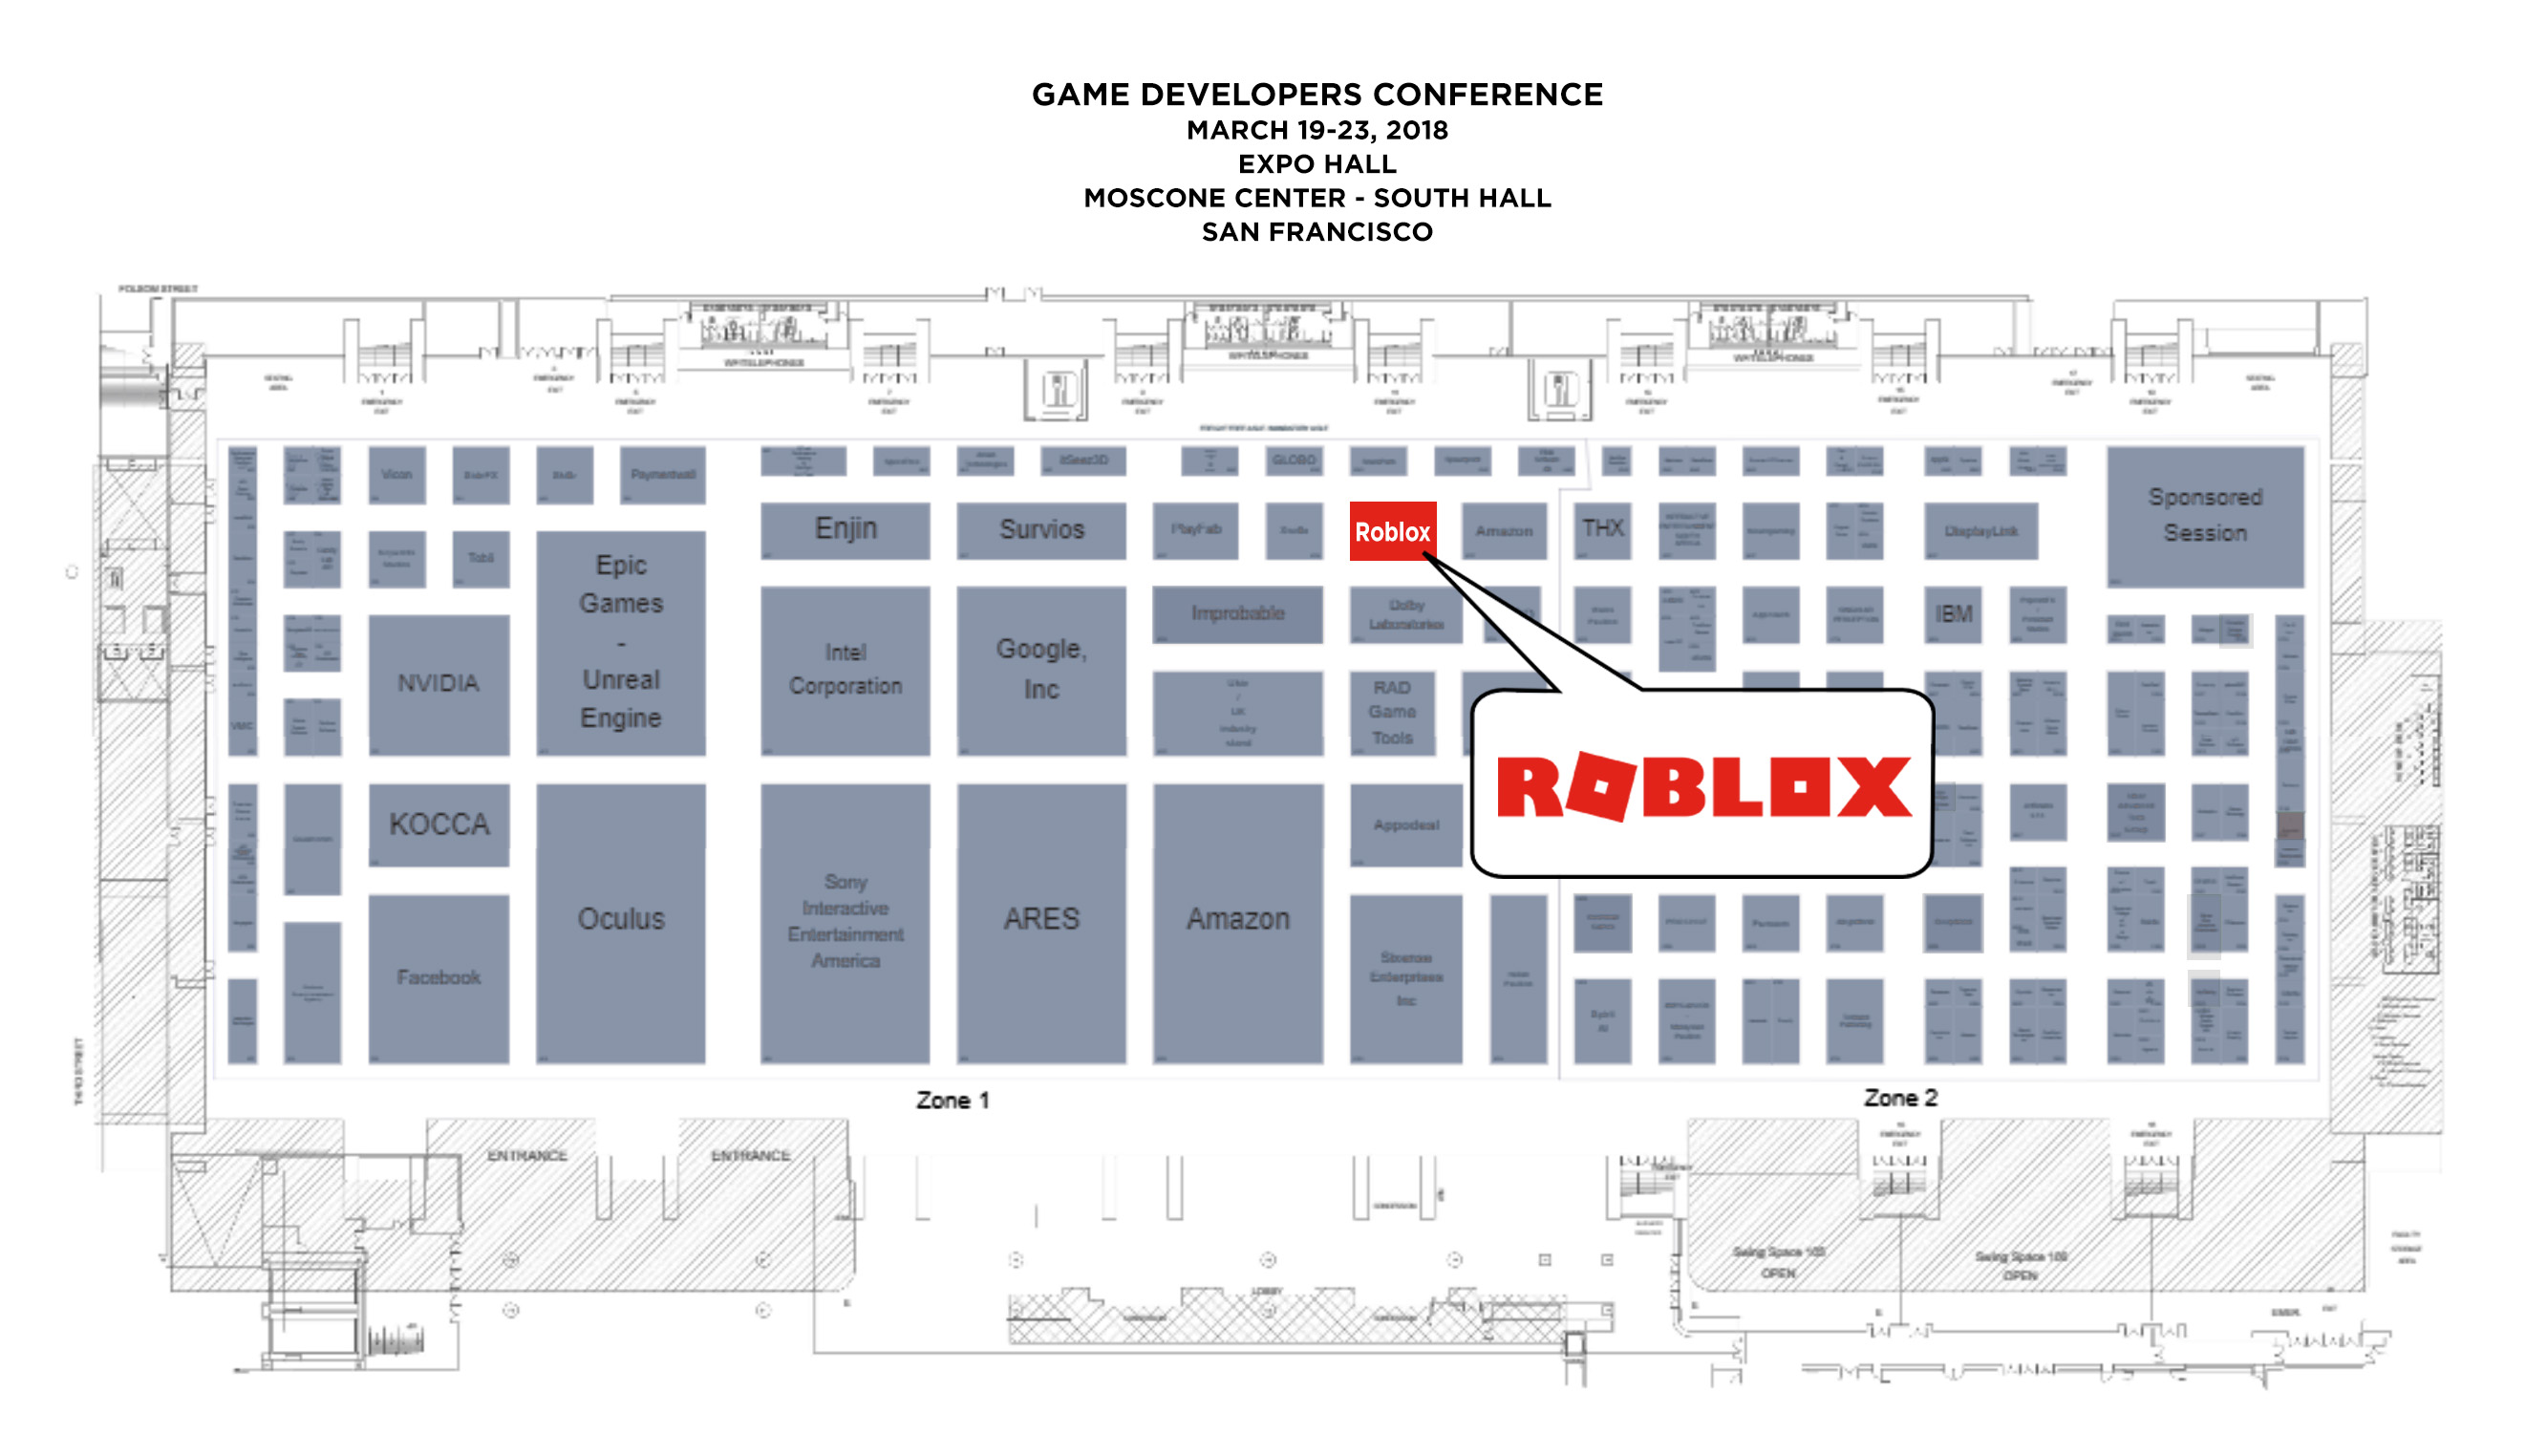 Connect With Roblox At Gdc 2018 Roblox Blog - roblox developer relations team